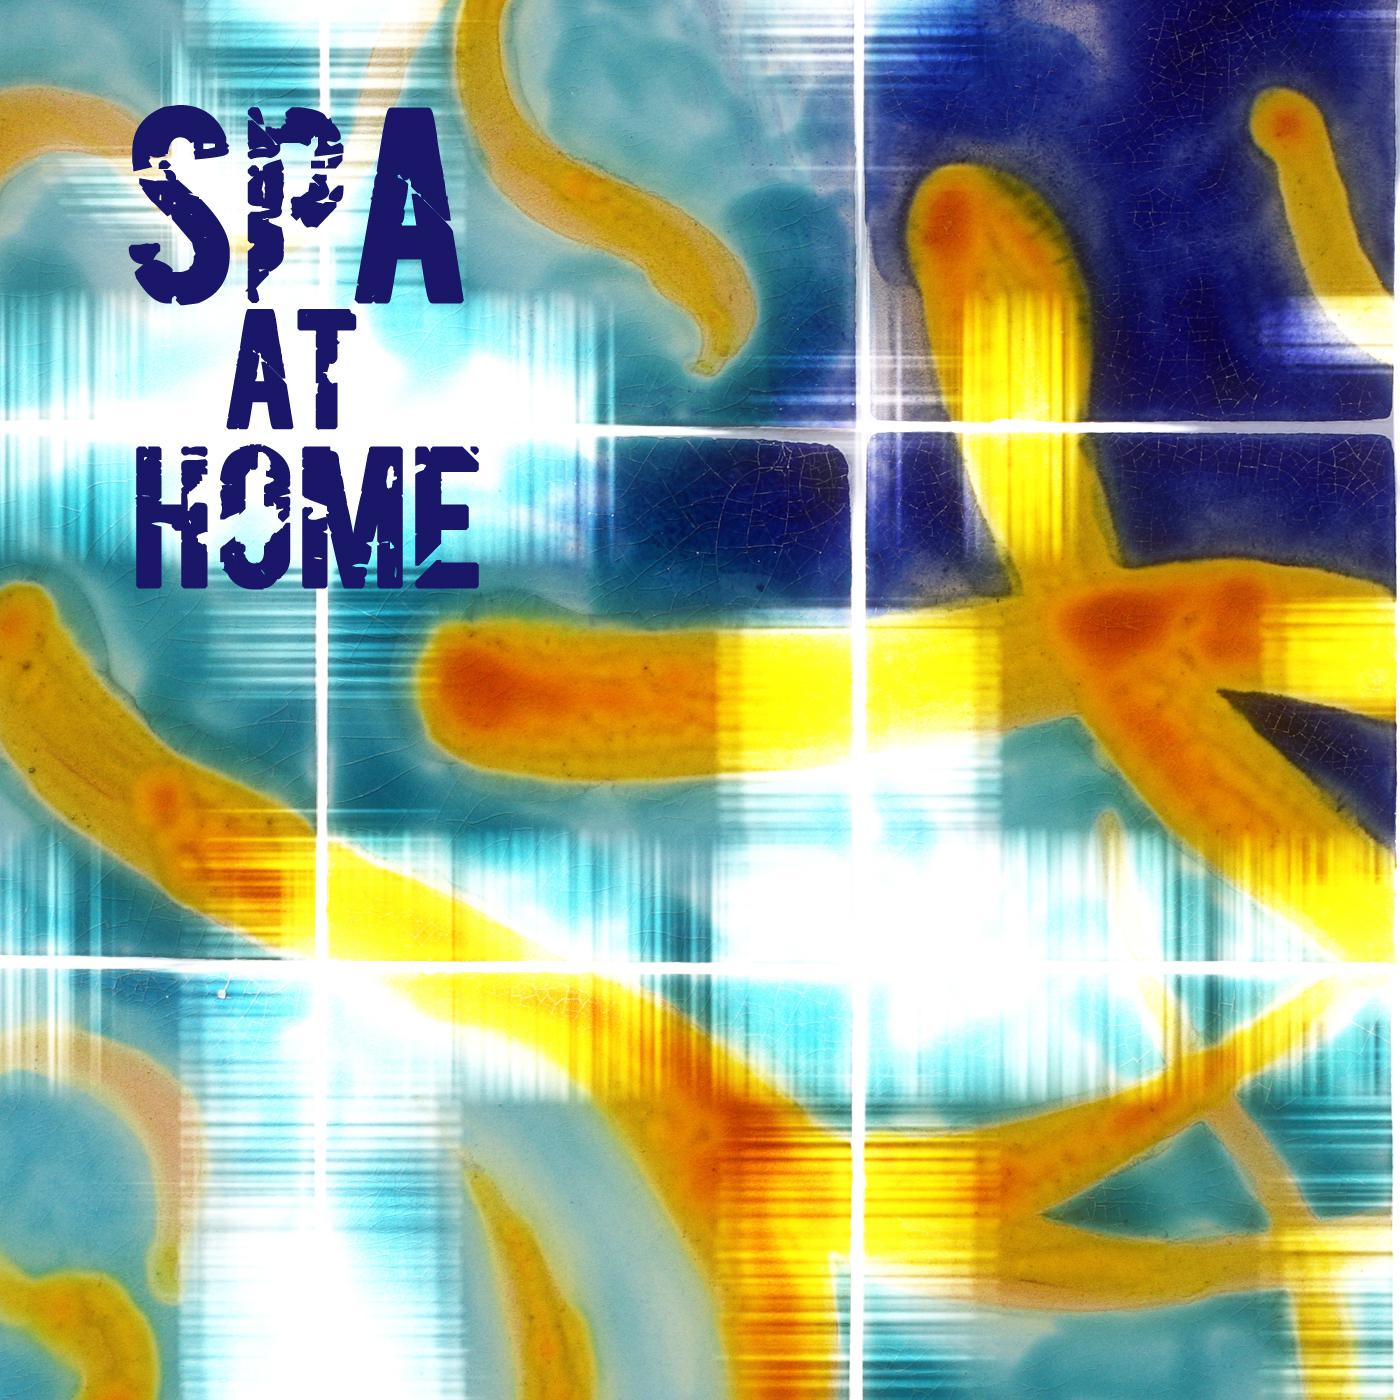 Scent - Relaxing Piano Music for Aromatherapy, Sound Therapy and Spa Therapy at Home